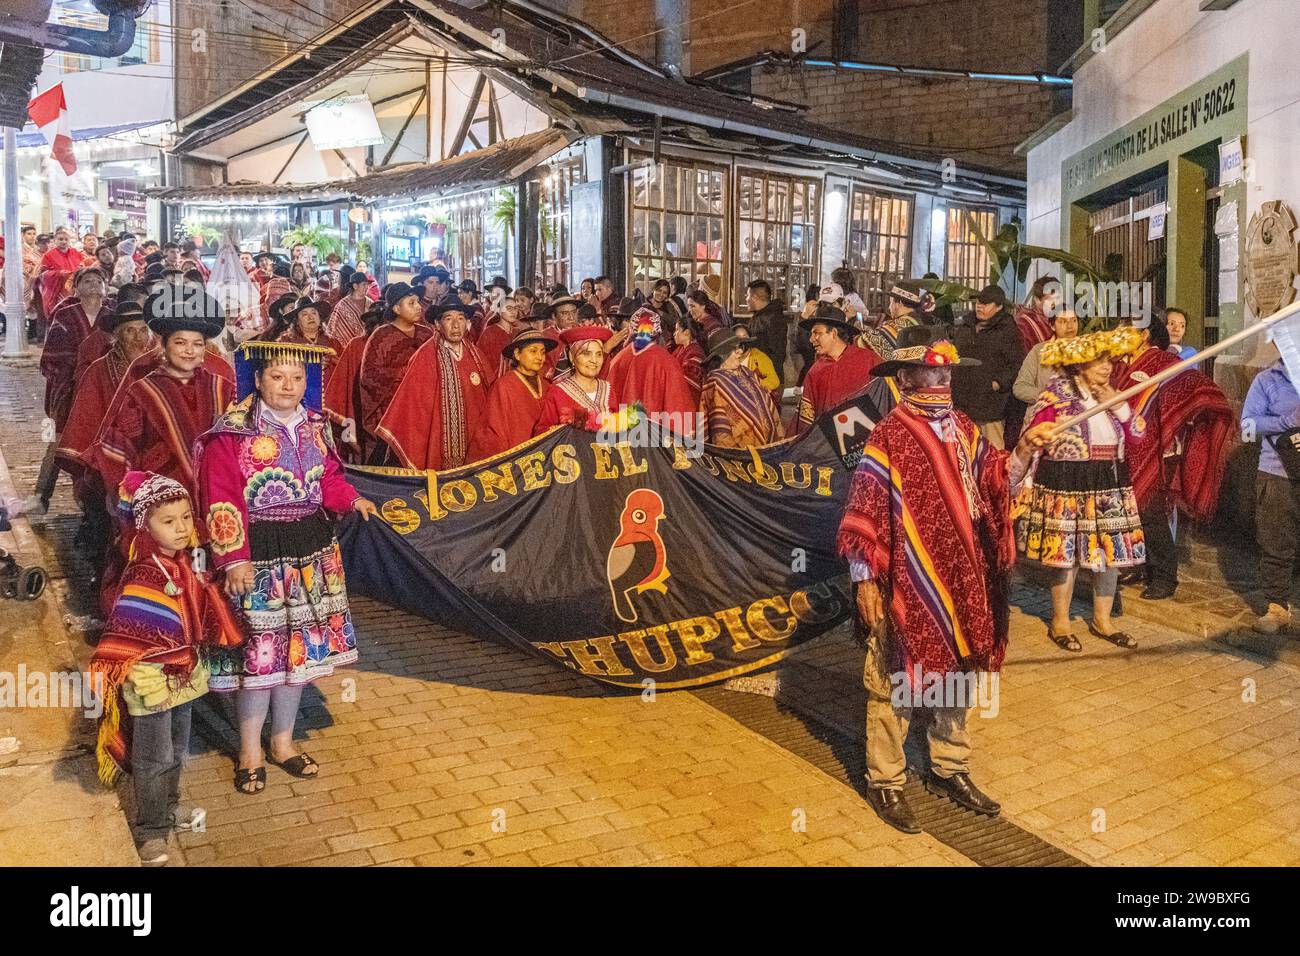 A ceremony procession in Aguas Calientes, Peru, celebrating the anniversary of Machu Picchu being declared a wonder of the world Stock Photo